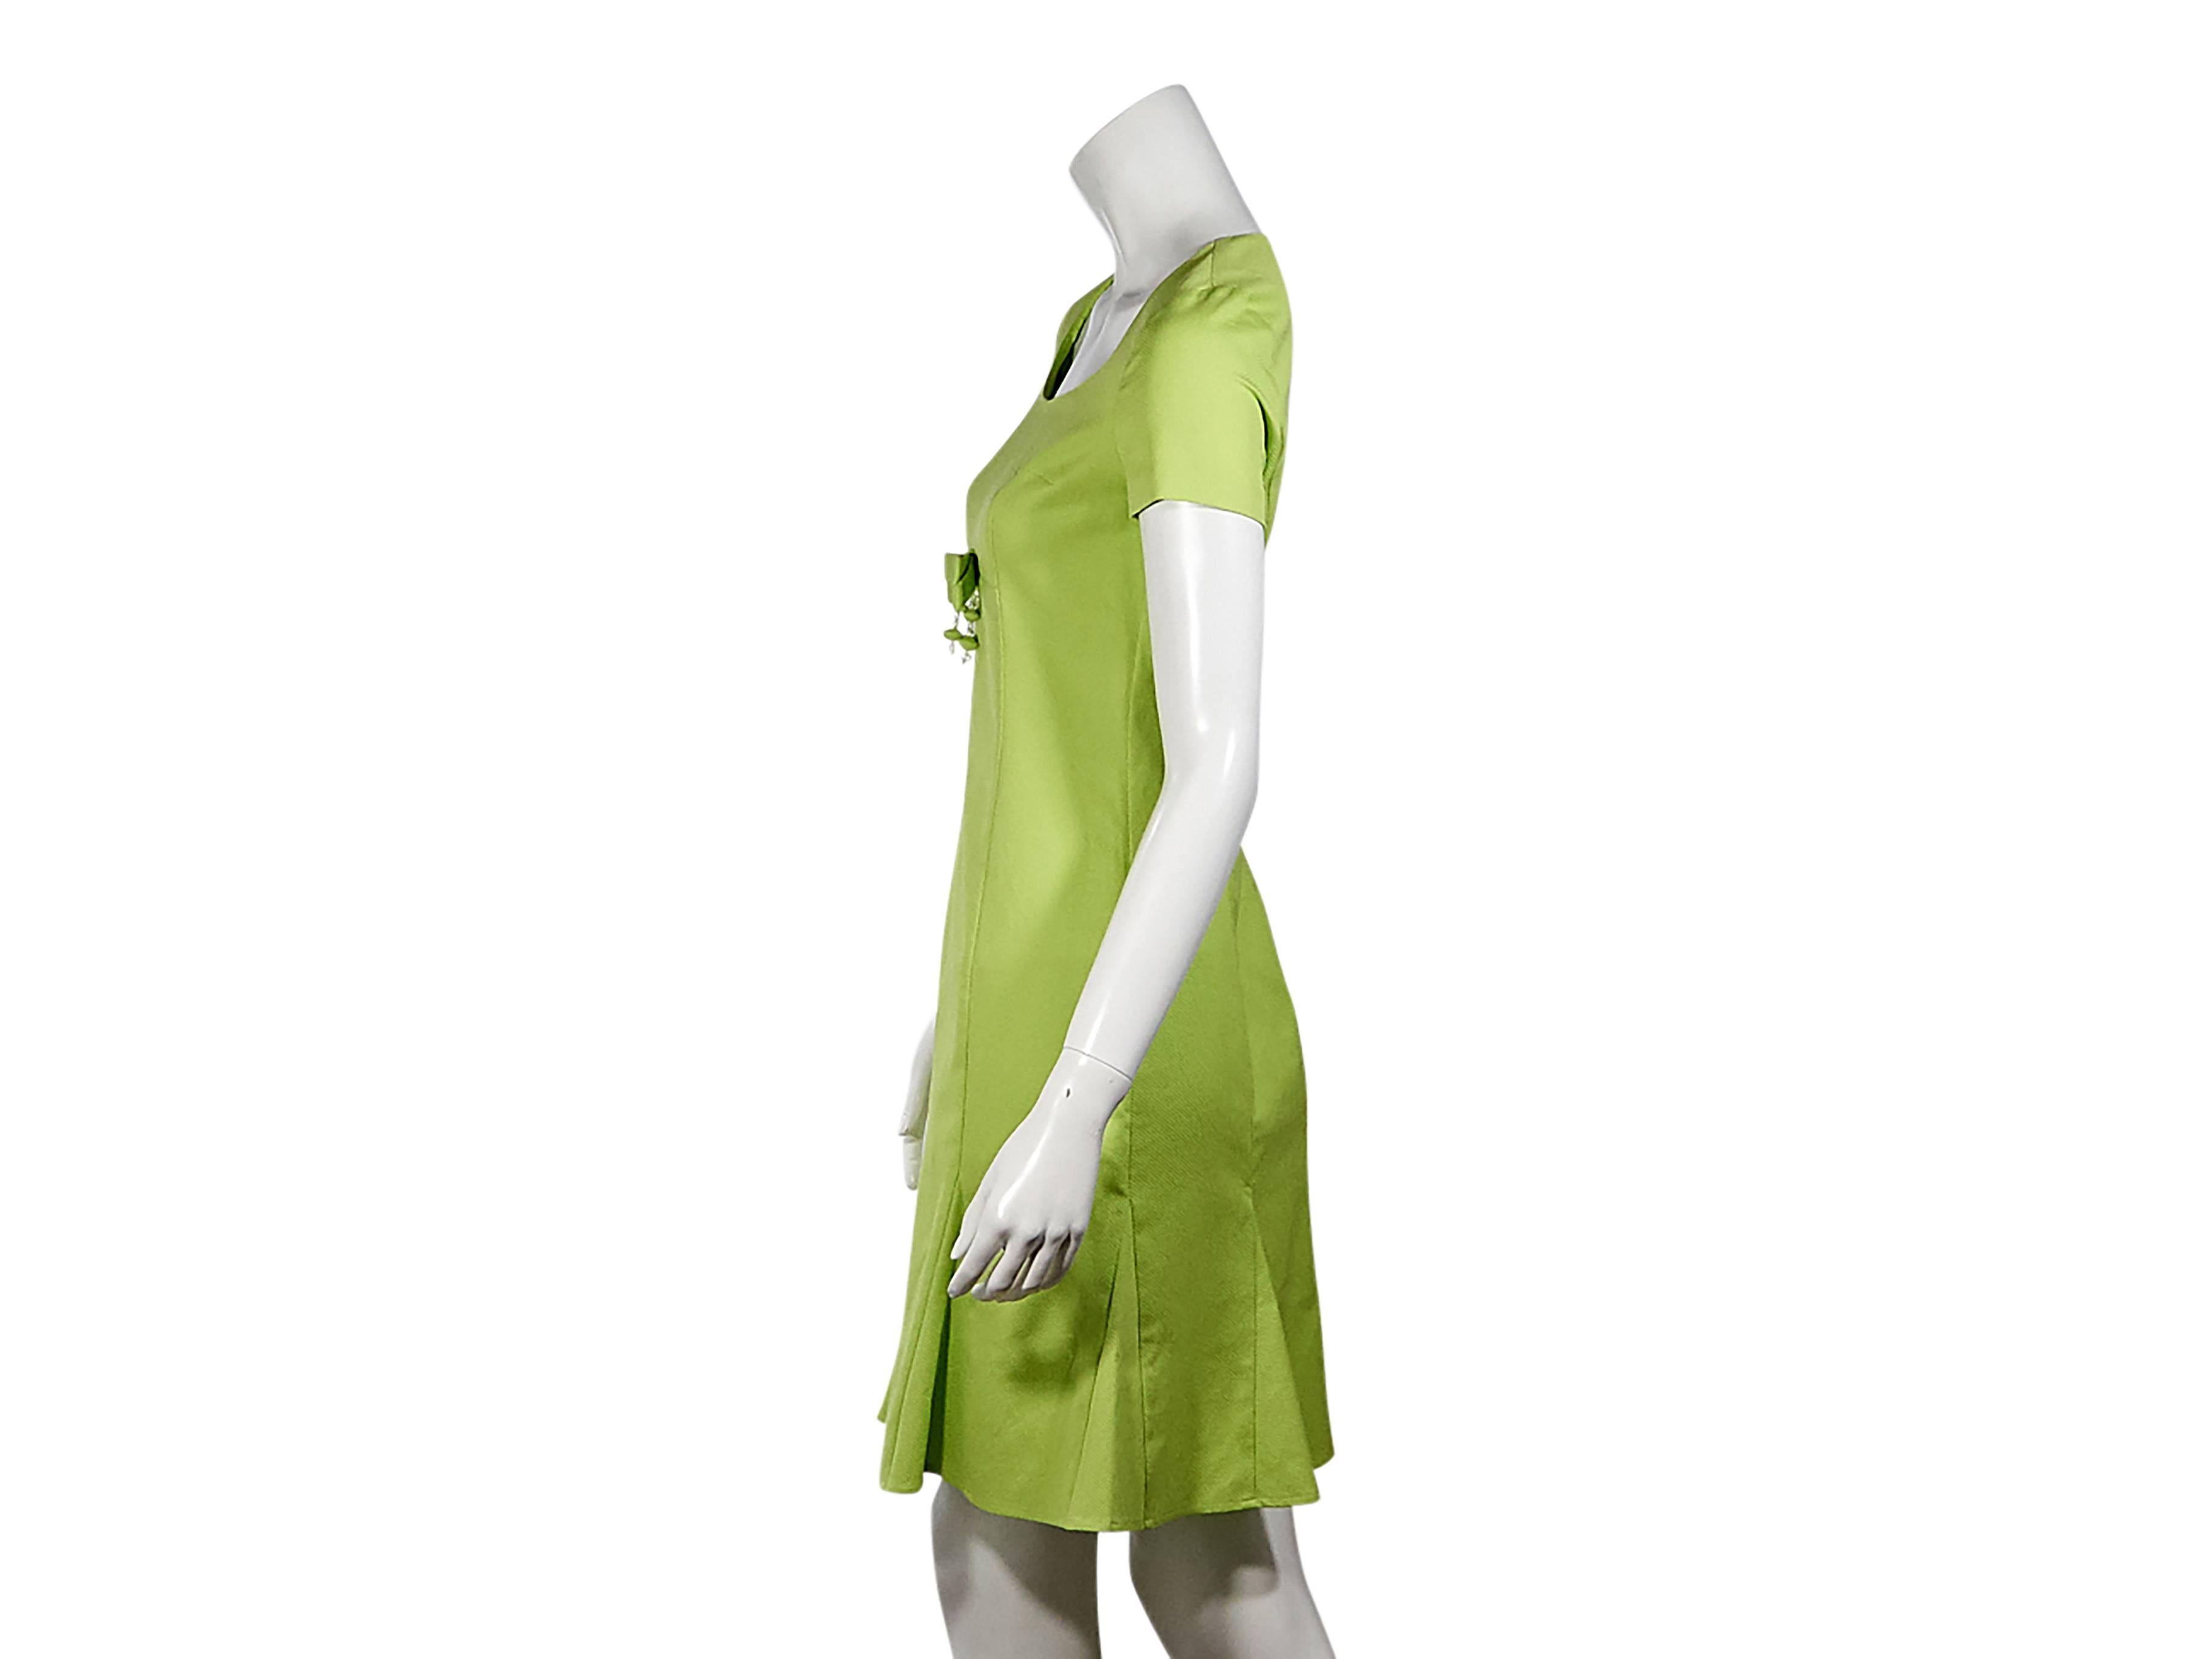 Product details:  Lime green sheath dress by Moschino Cheap + Chic.  Scoopneck.  Short sleeves.  Bow detail accents bodice.  Concealed back zip closure.  Flared pleated hem.  Size 6
Condition: Pre-owned. New with tags.

Est. Retail $ 1,200.00